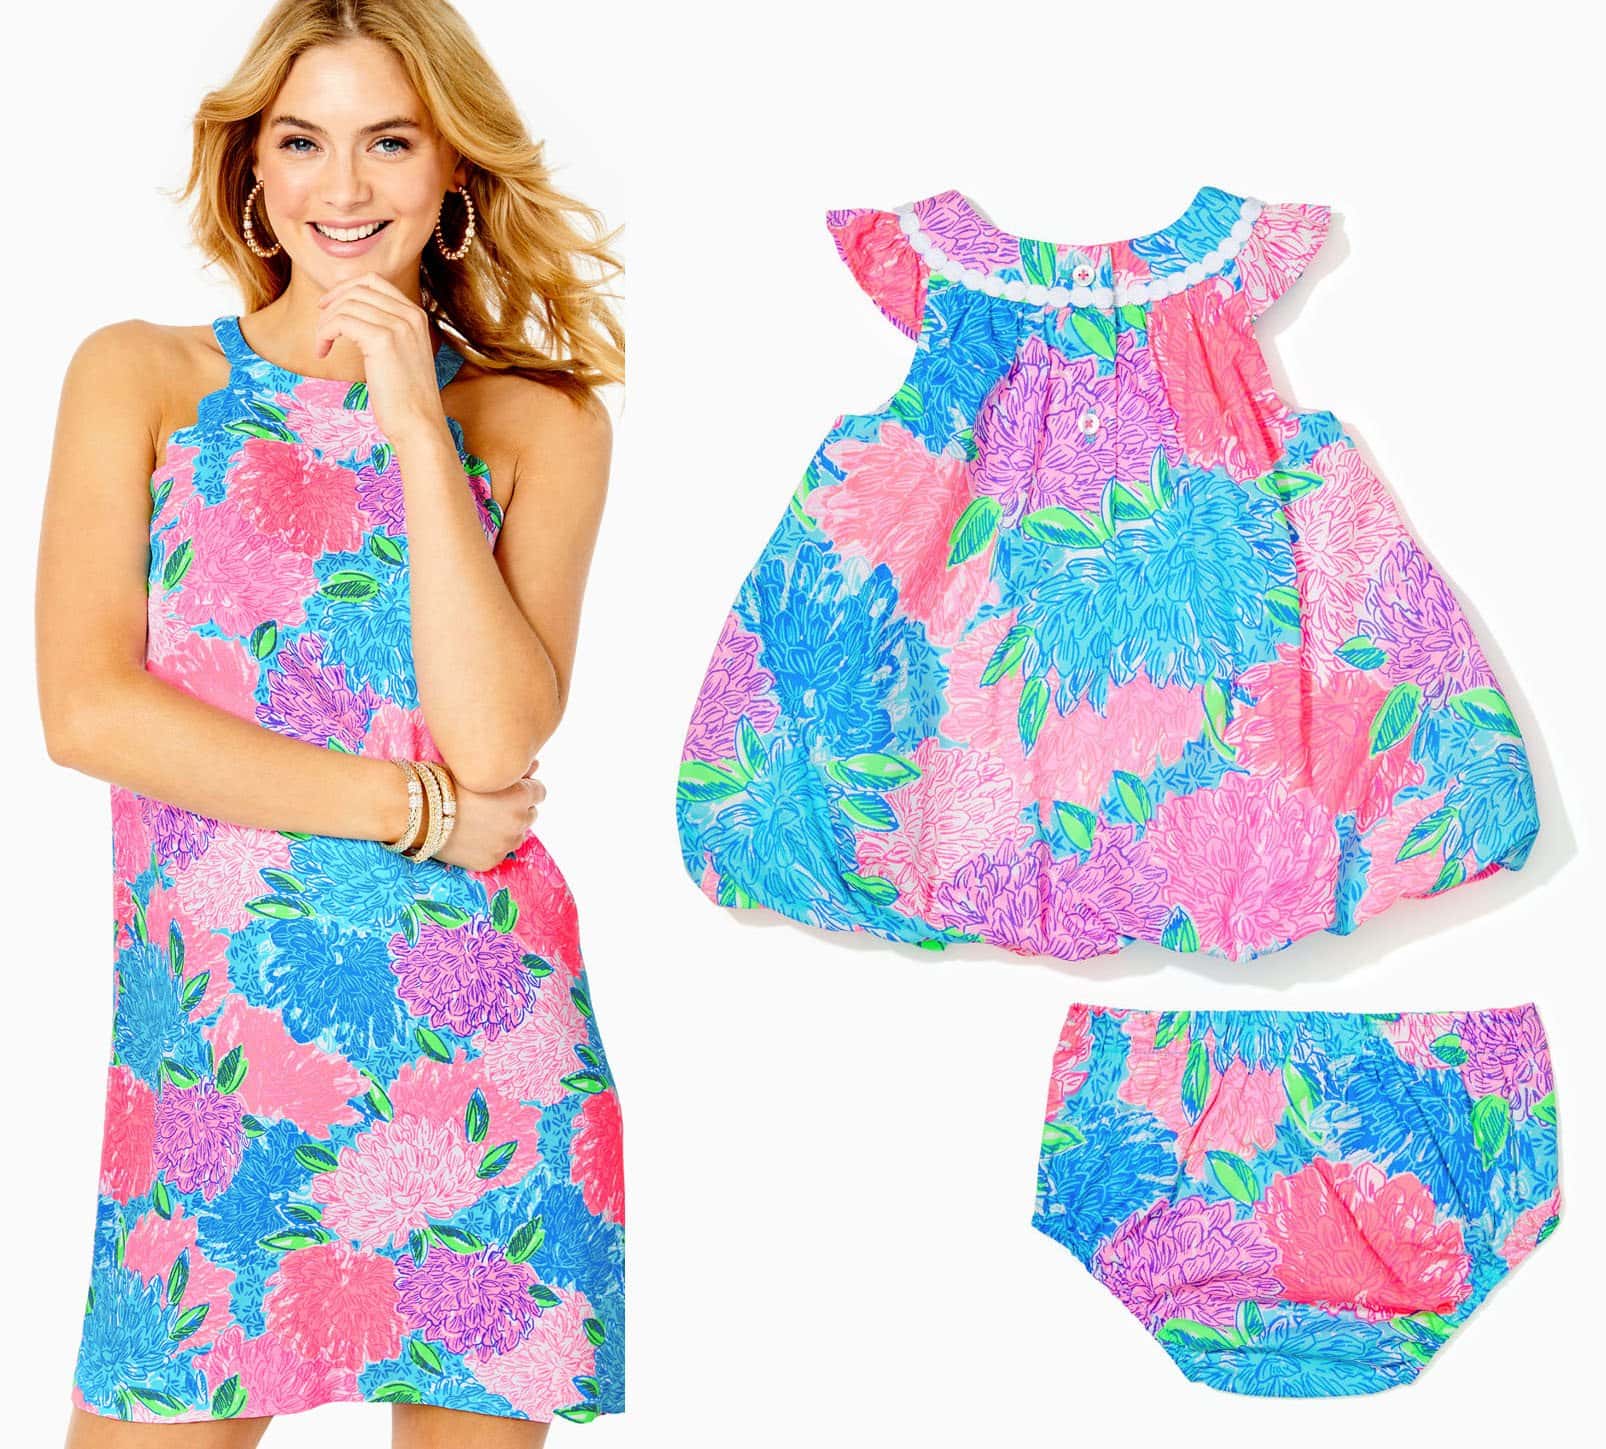 Tabby Shift dress in Multi Beach House Blooms; Baby Paloma Bubble dress in matching print